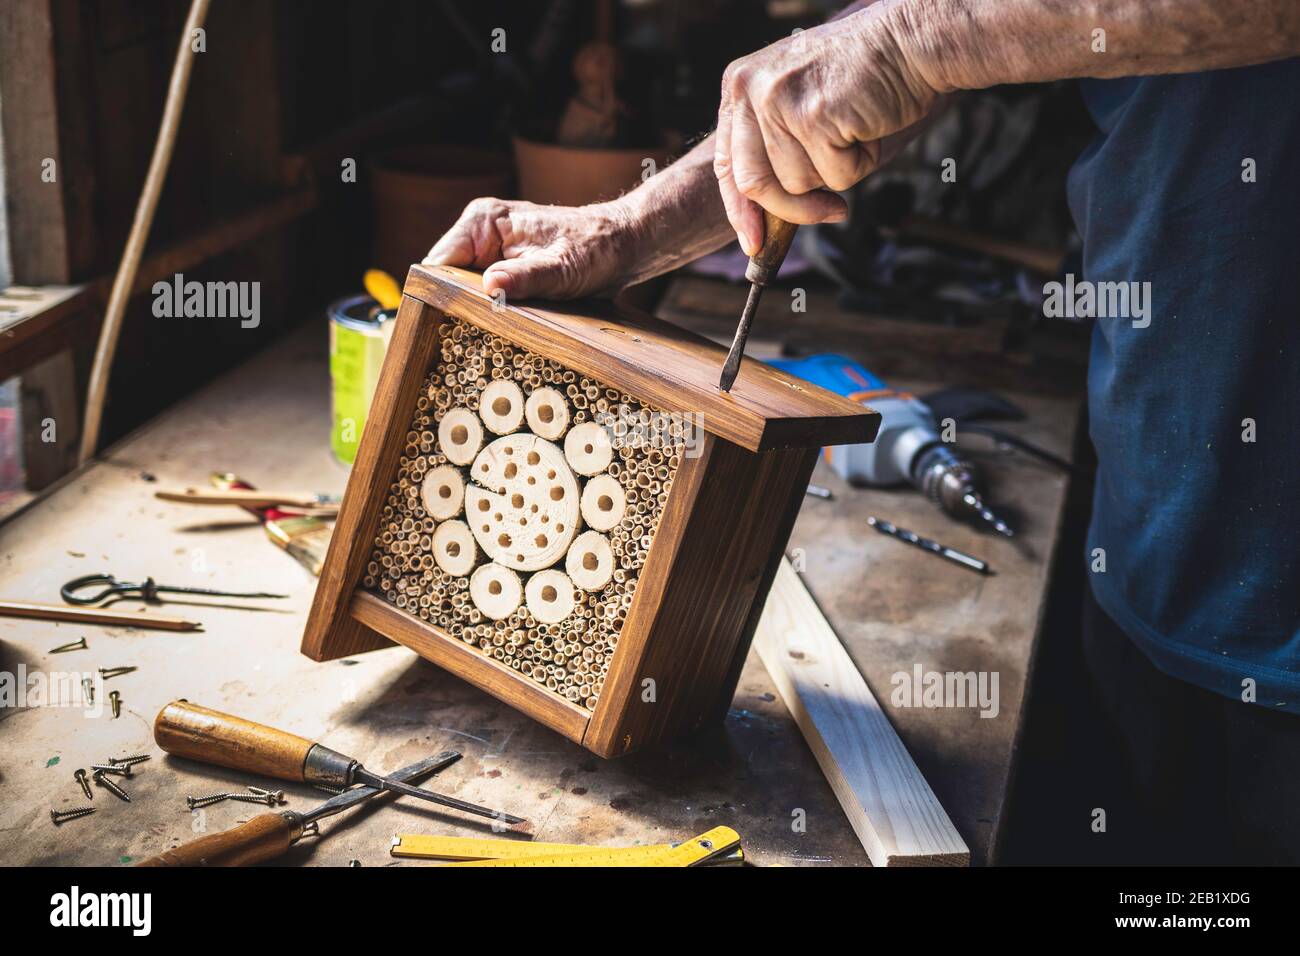 Man making wooden insect hotel. Craftsperson working in his workshop. Carpenter using screwdriver. Craft product Stock Photo